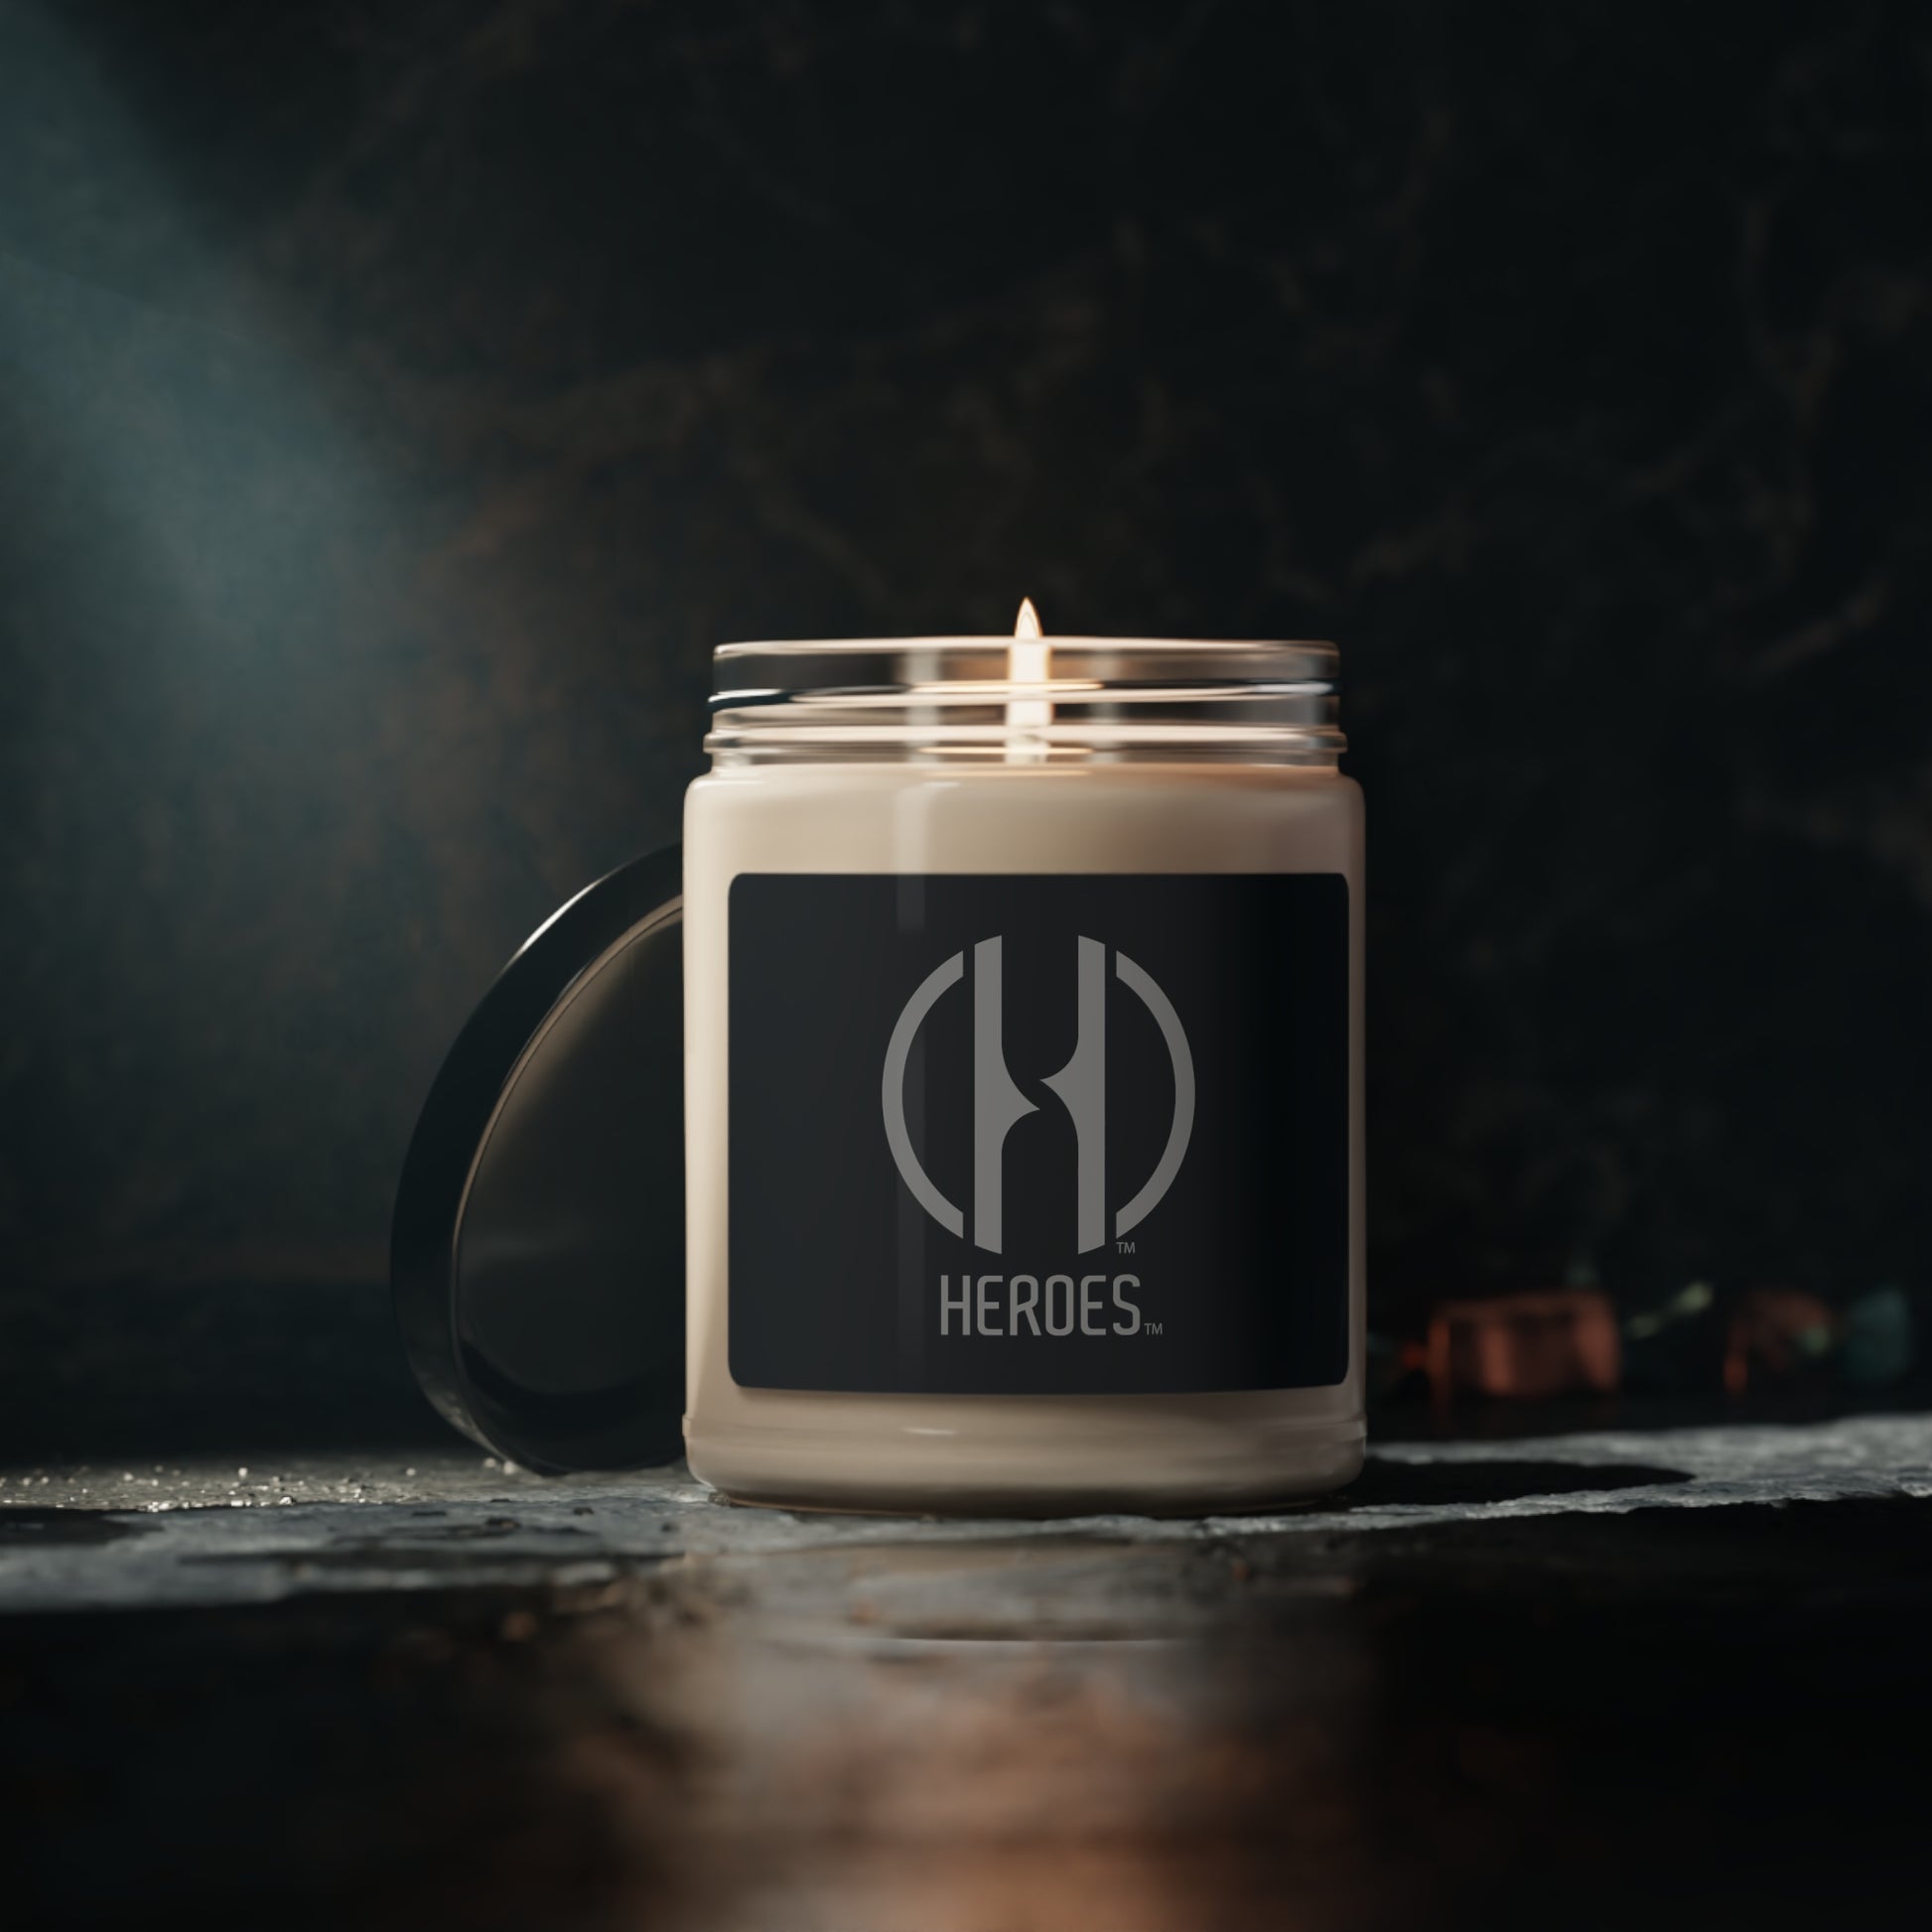 HEROES Scented Soy Candle, 9oz - Making It Happen Foundation Inc.